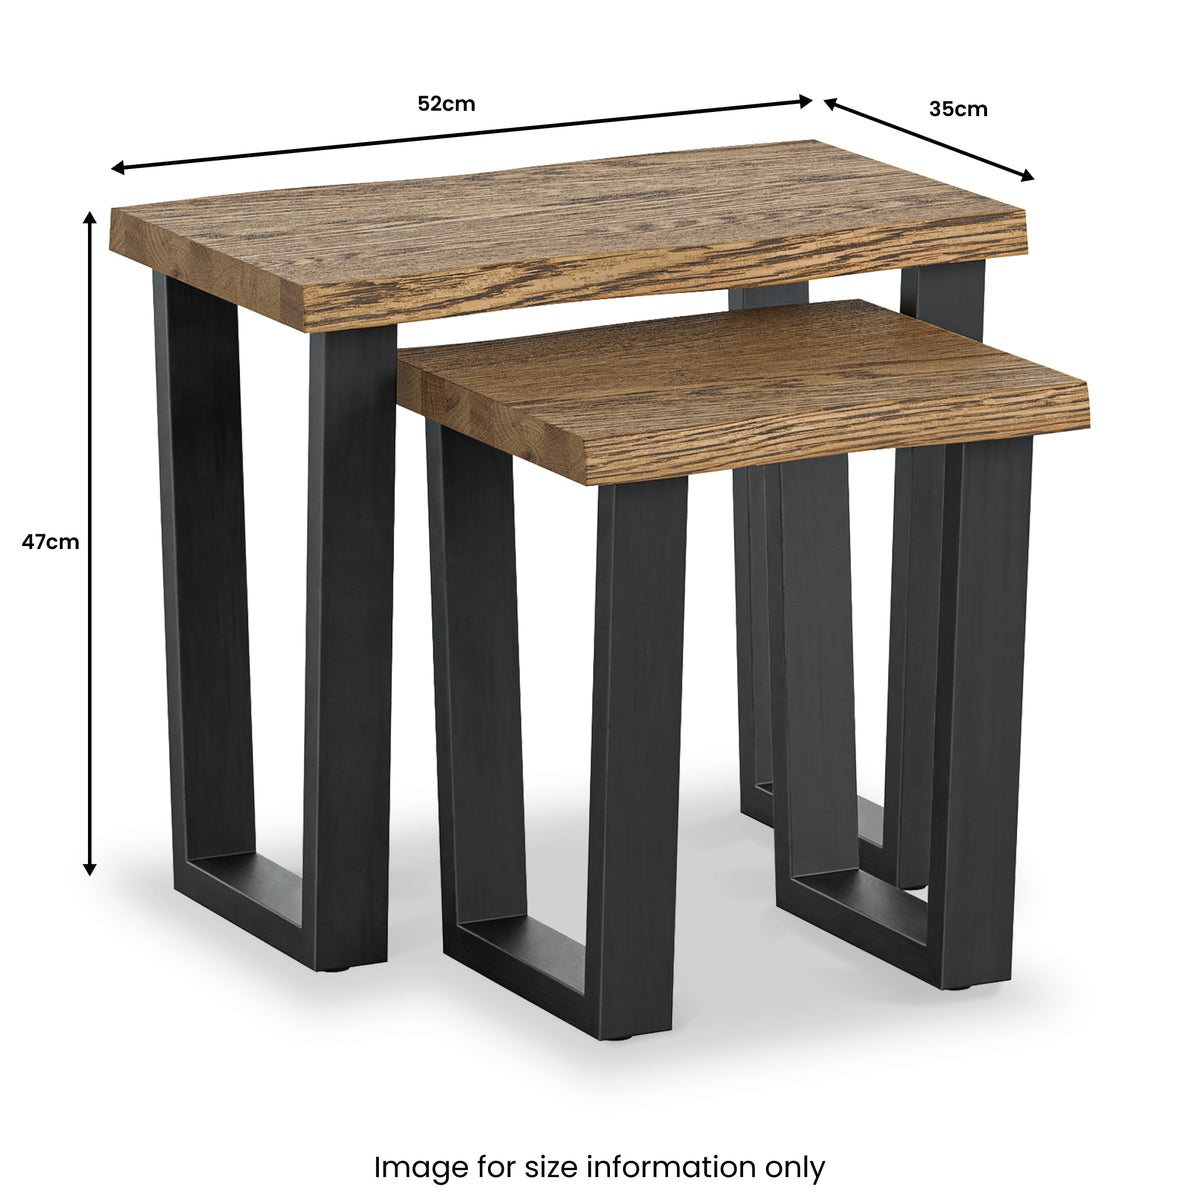 Isaac Oak Nest of Tables dimensions